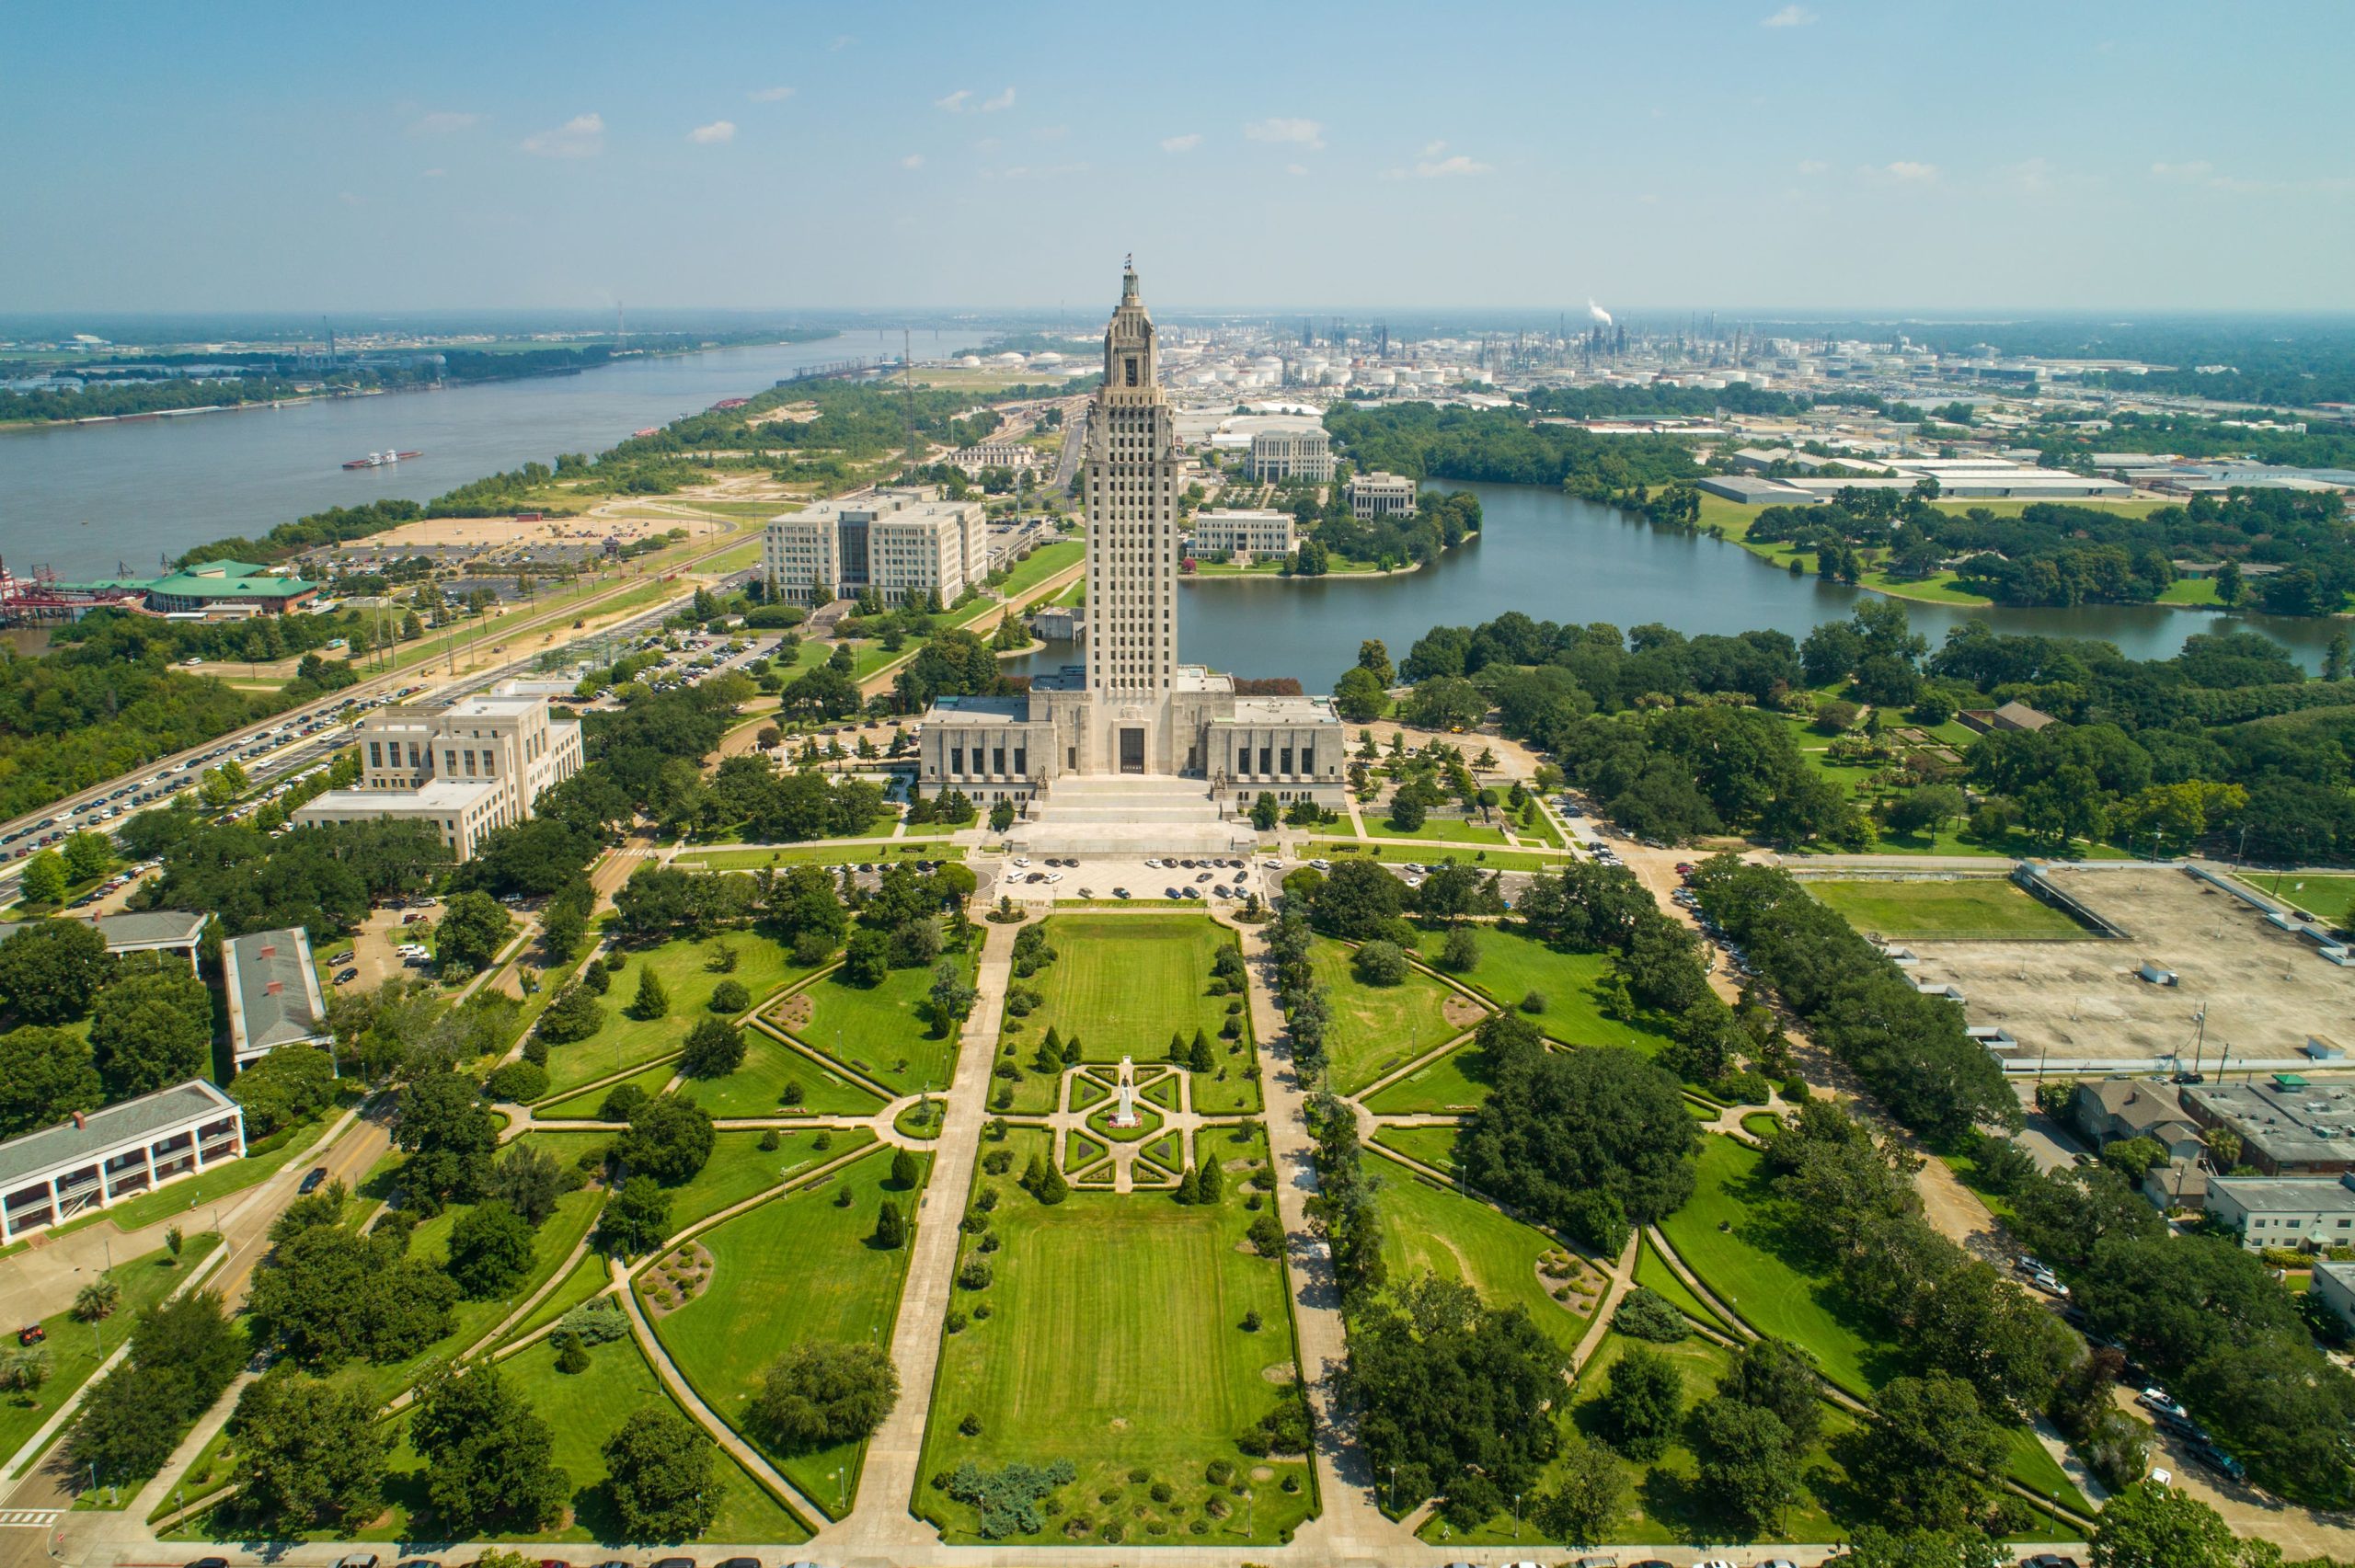 State Capitol Park Baton Rouge Drone Image